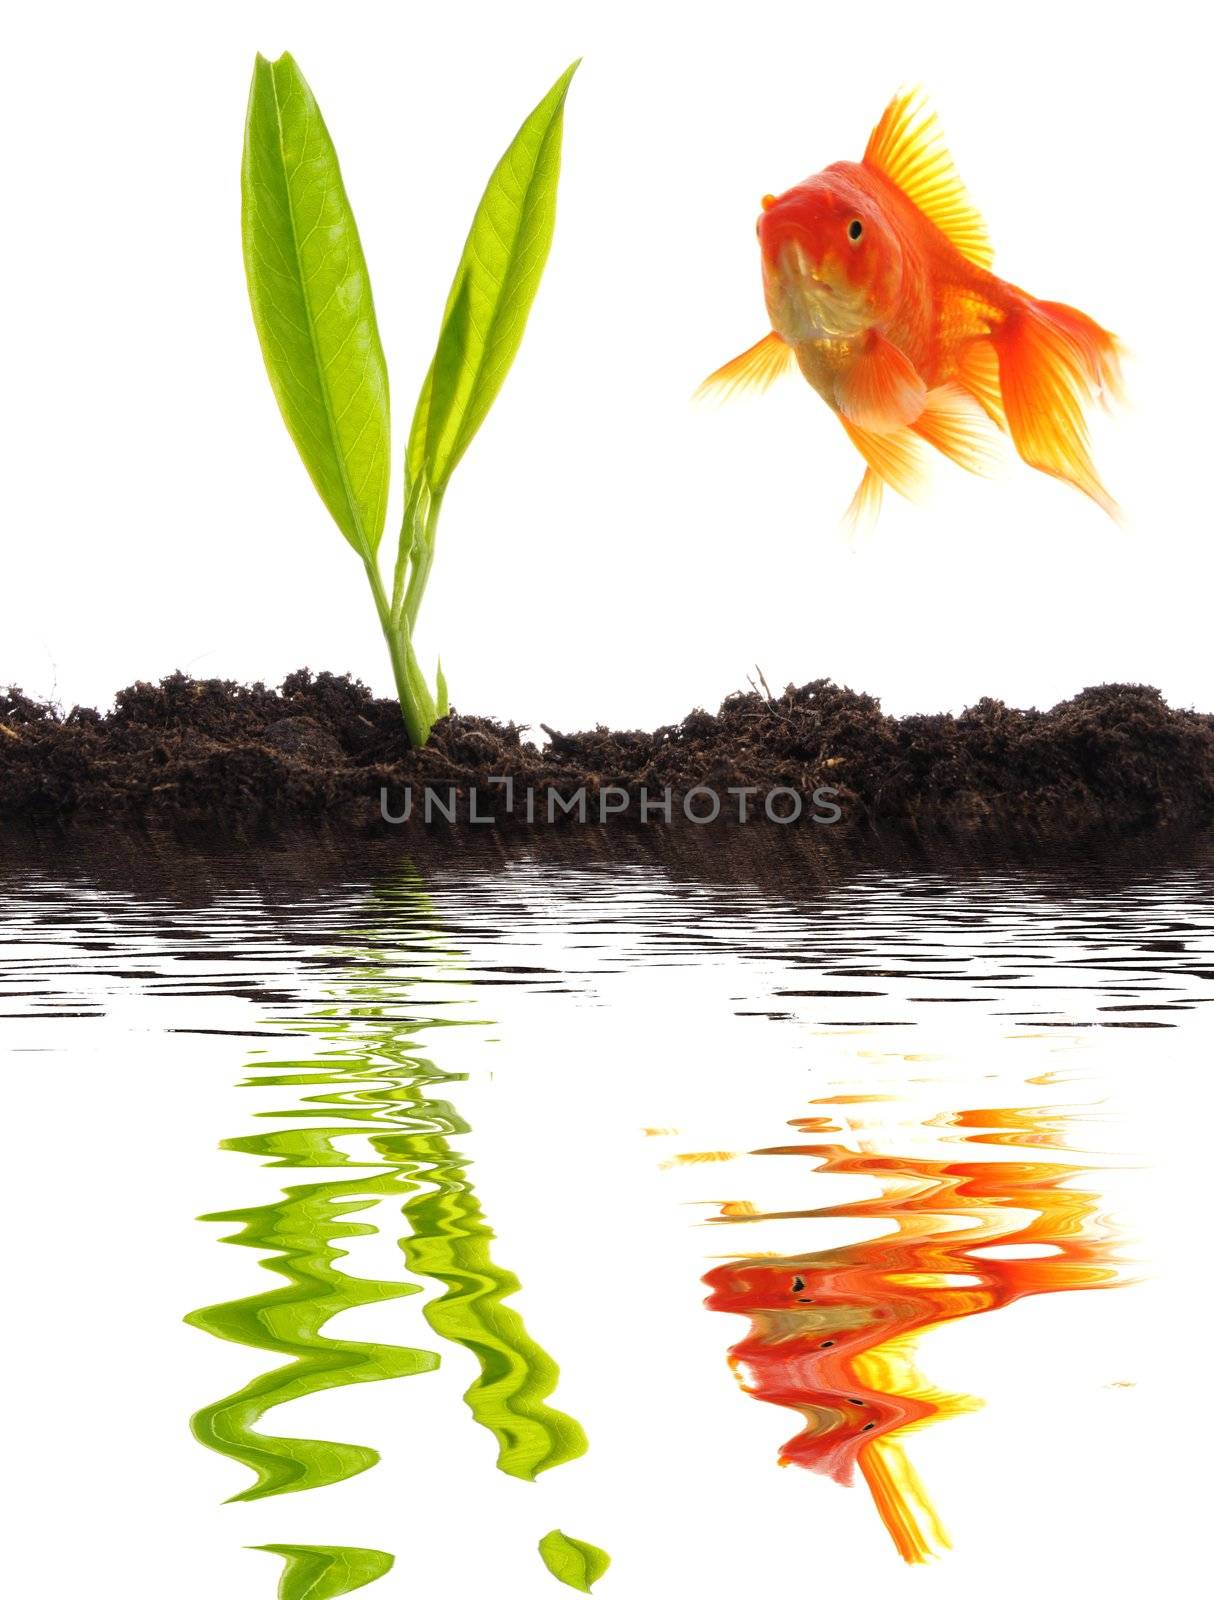 young plant goldfish and soil with water reflection showing growth and success